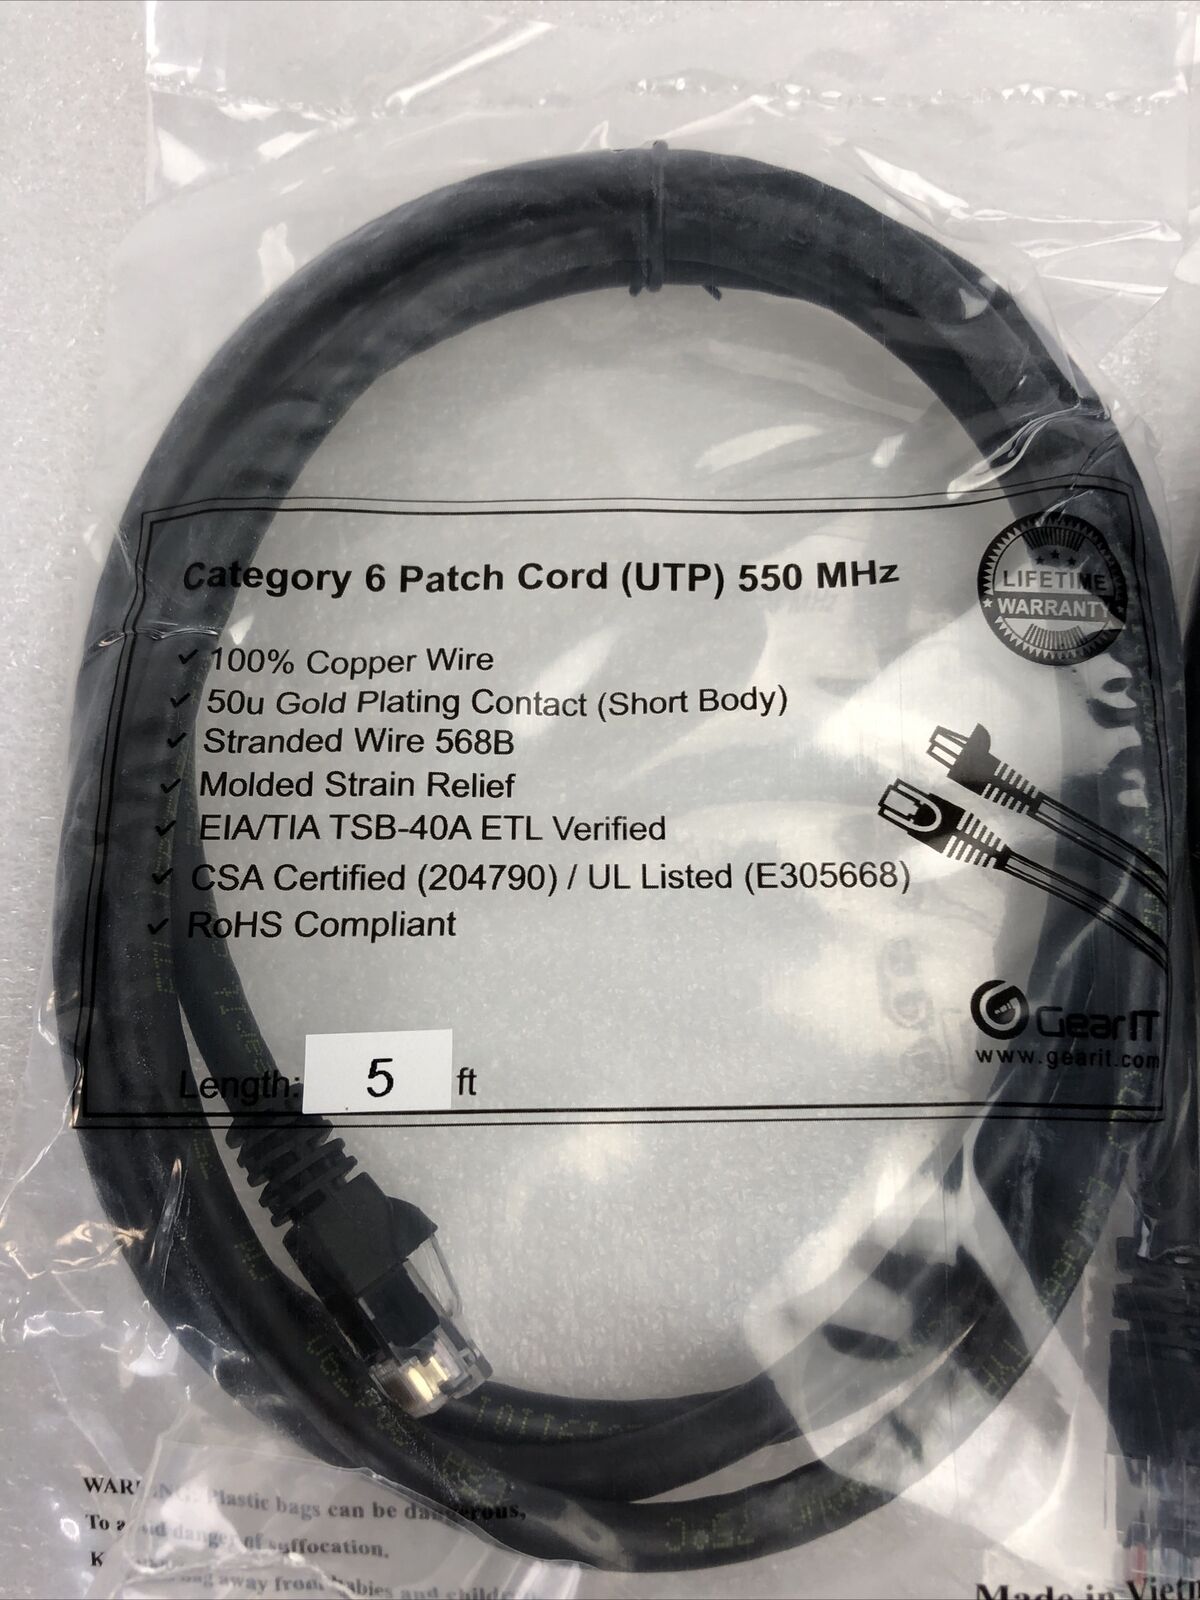 Lot of 4 Category 6  Patch Cord (UTP) 5ft 550 Mhz